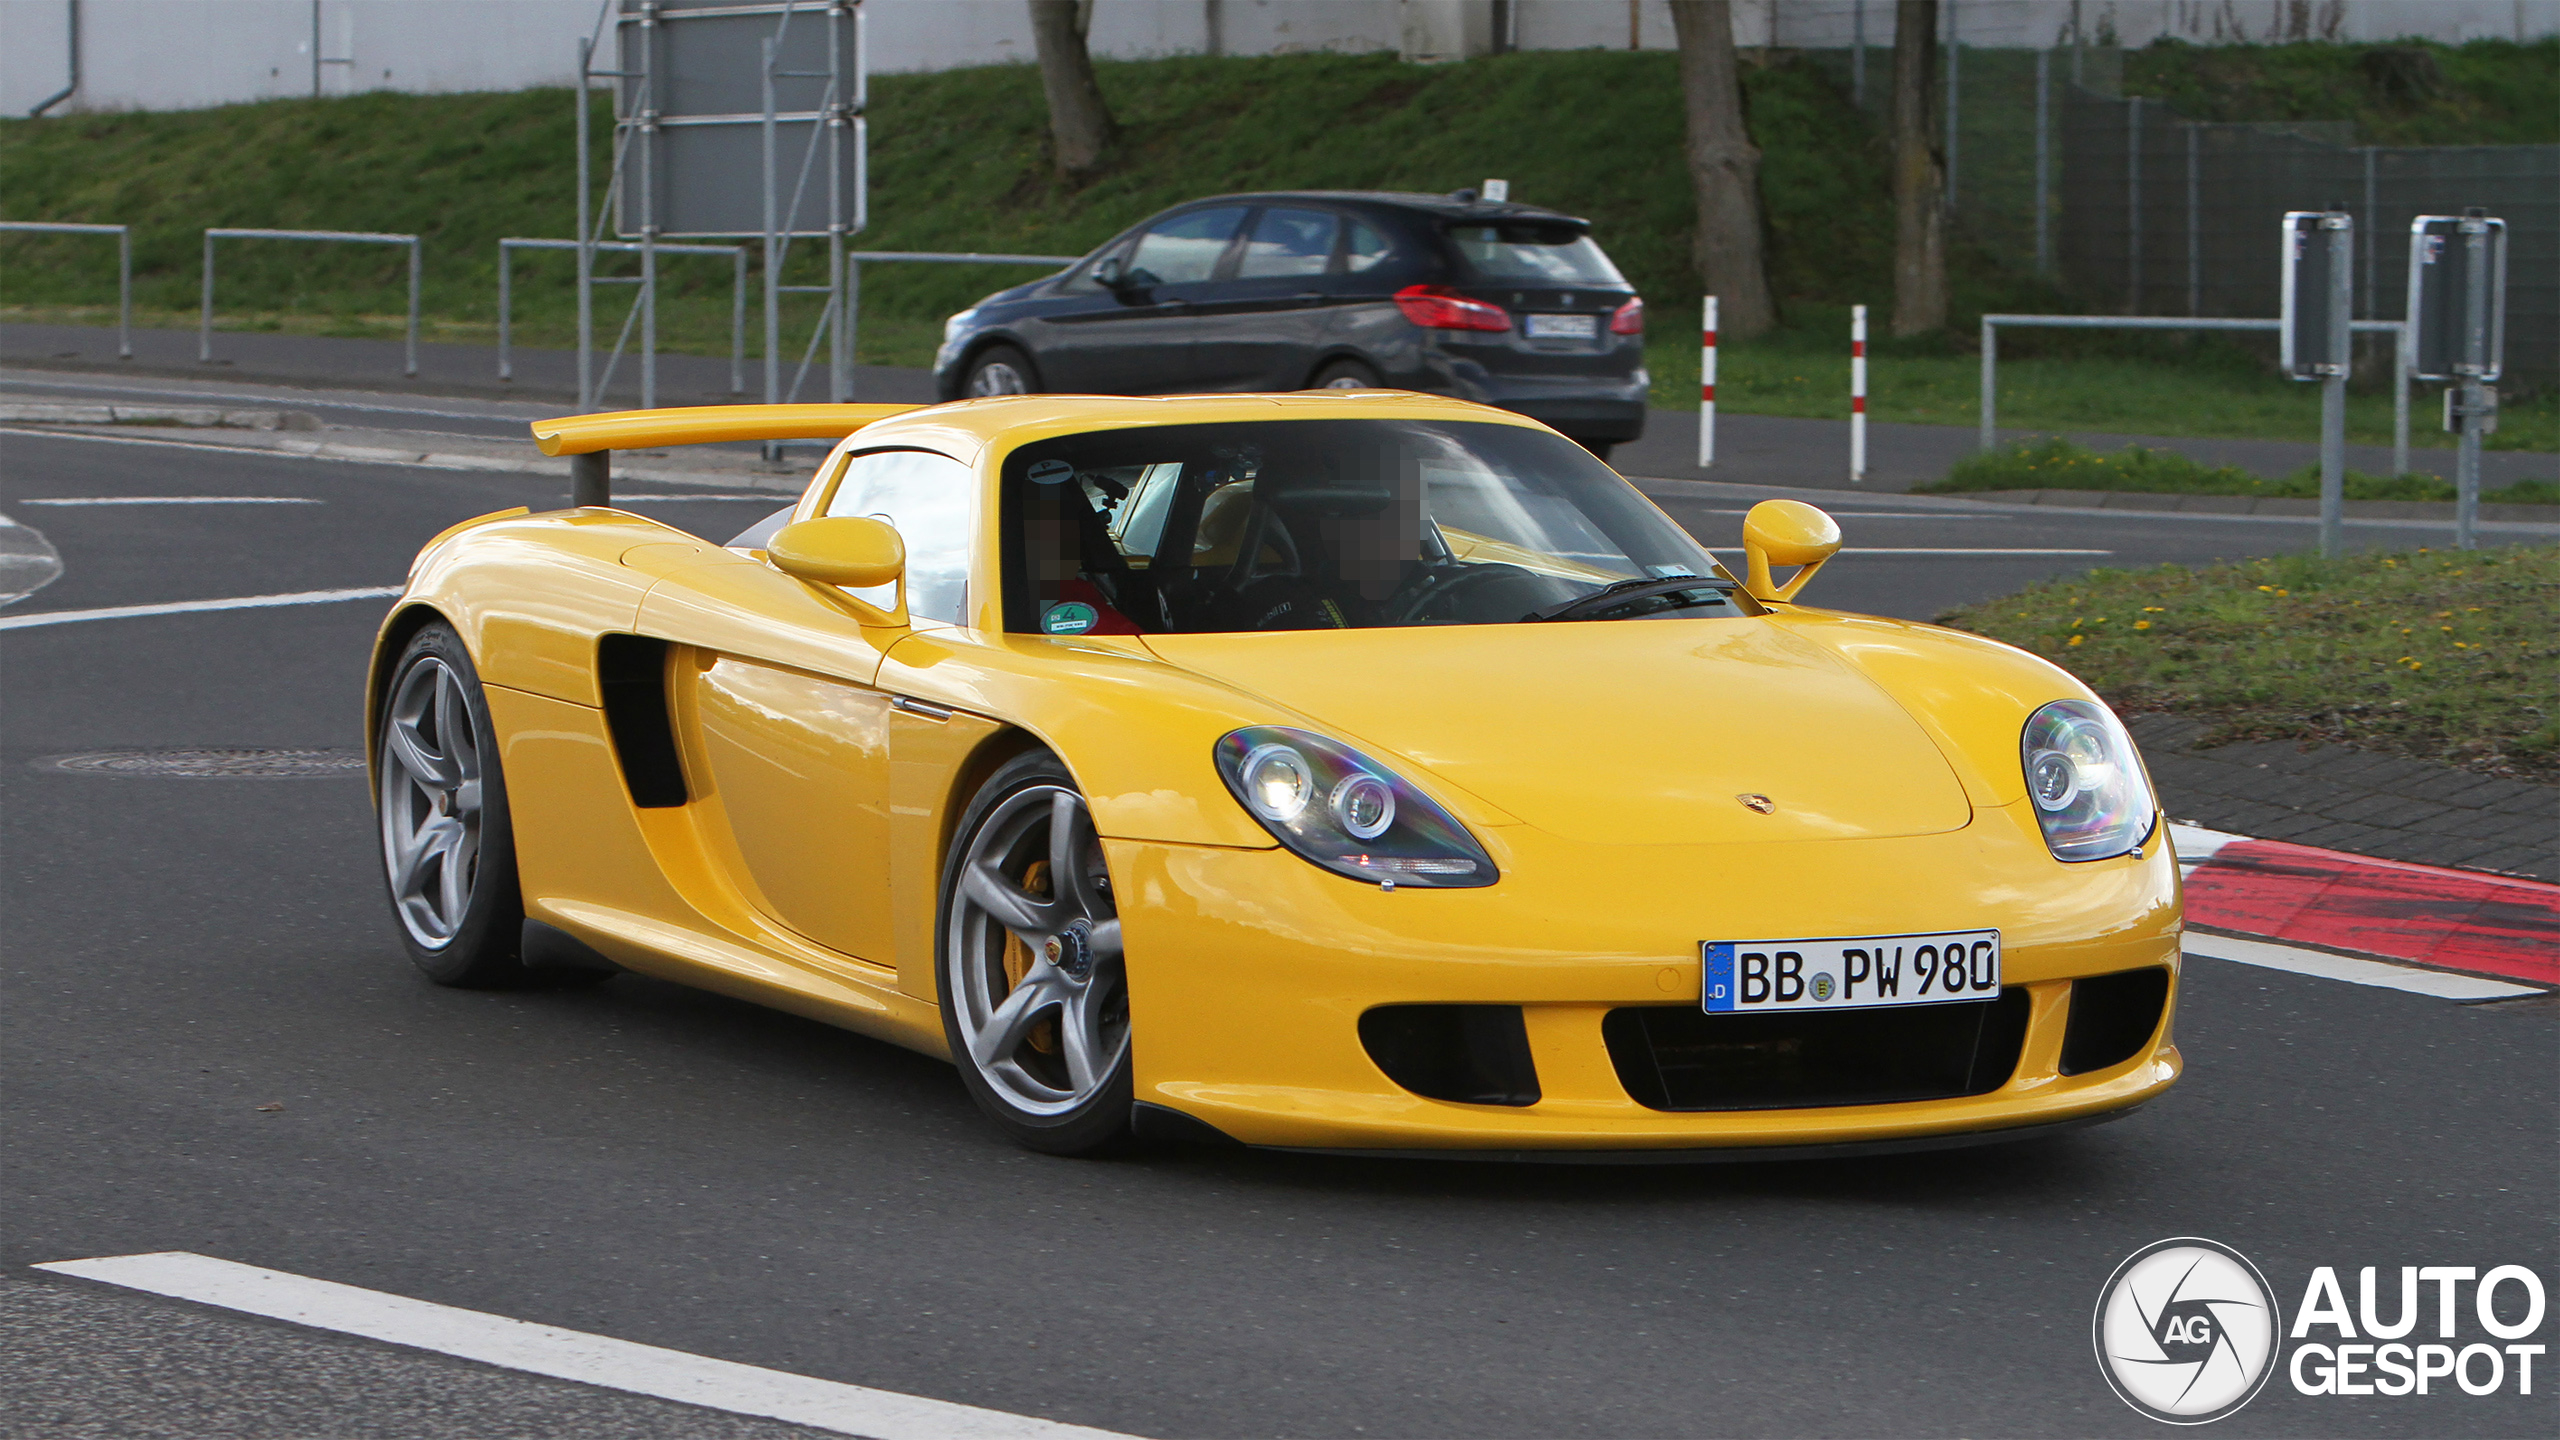 Retesting phase for the Carrera GT